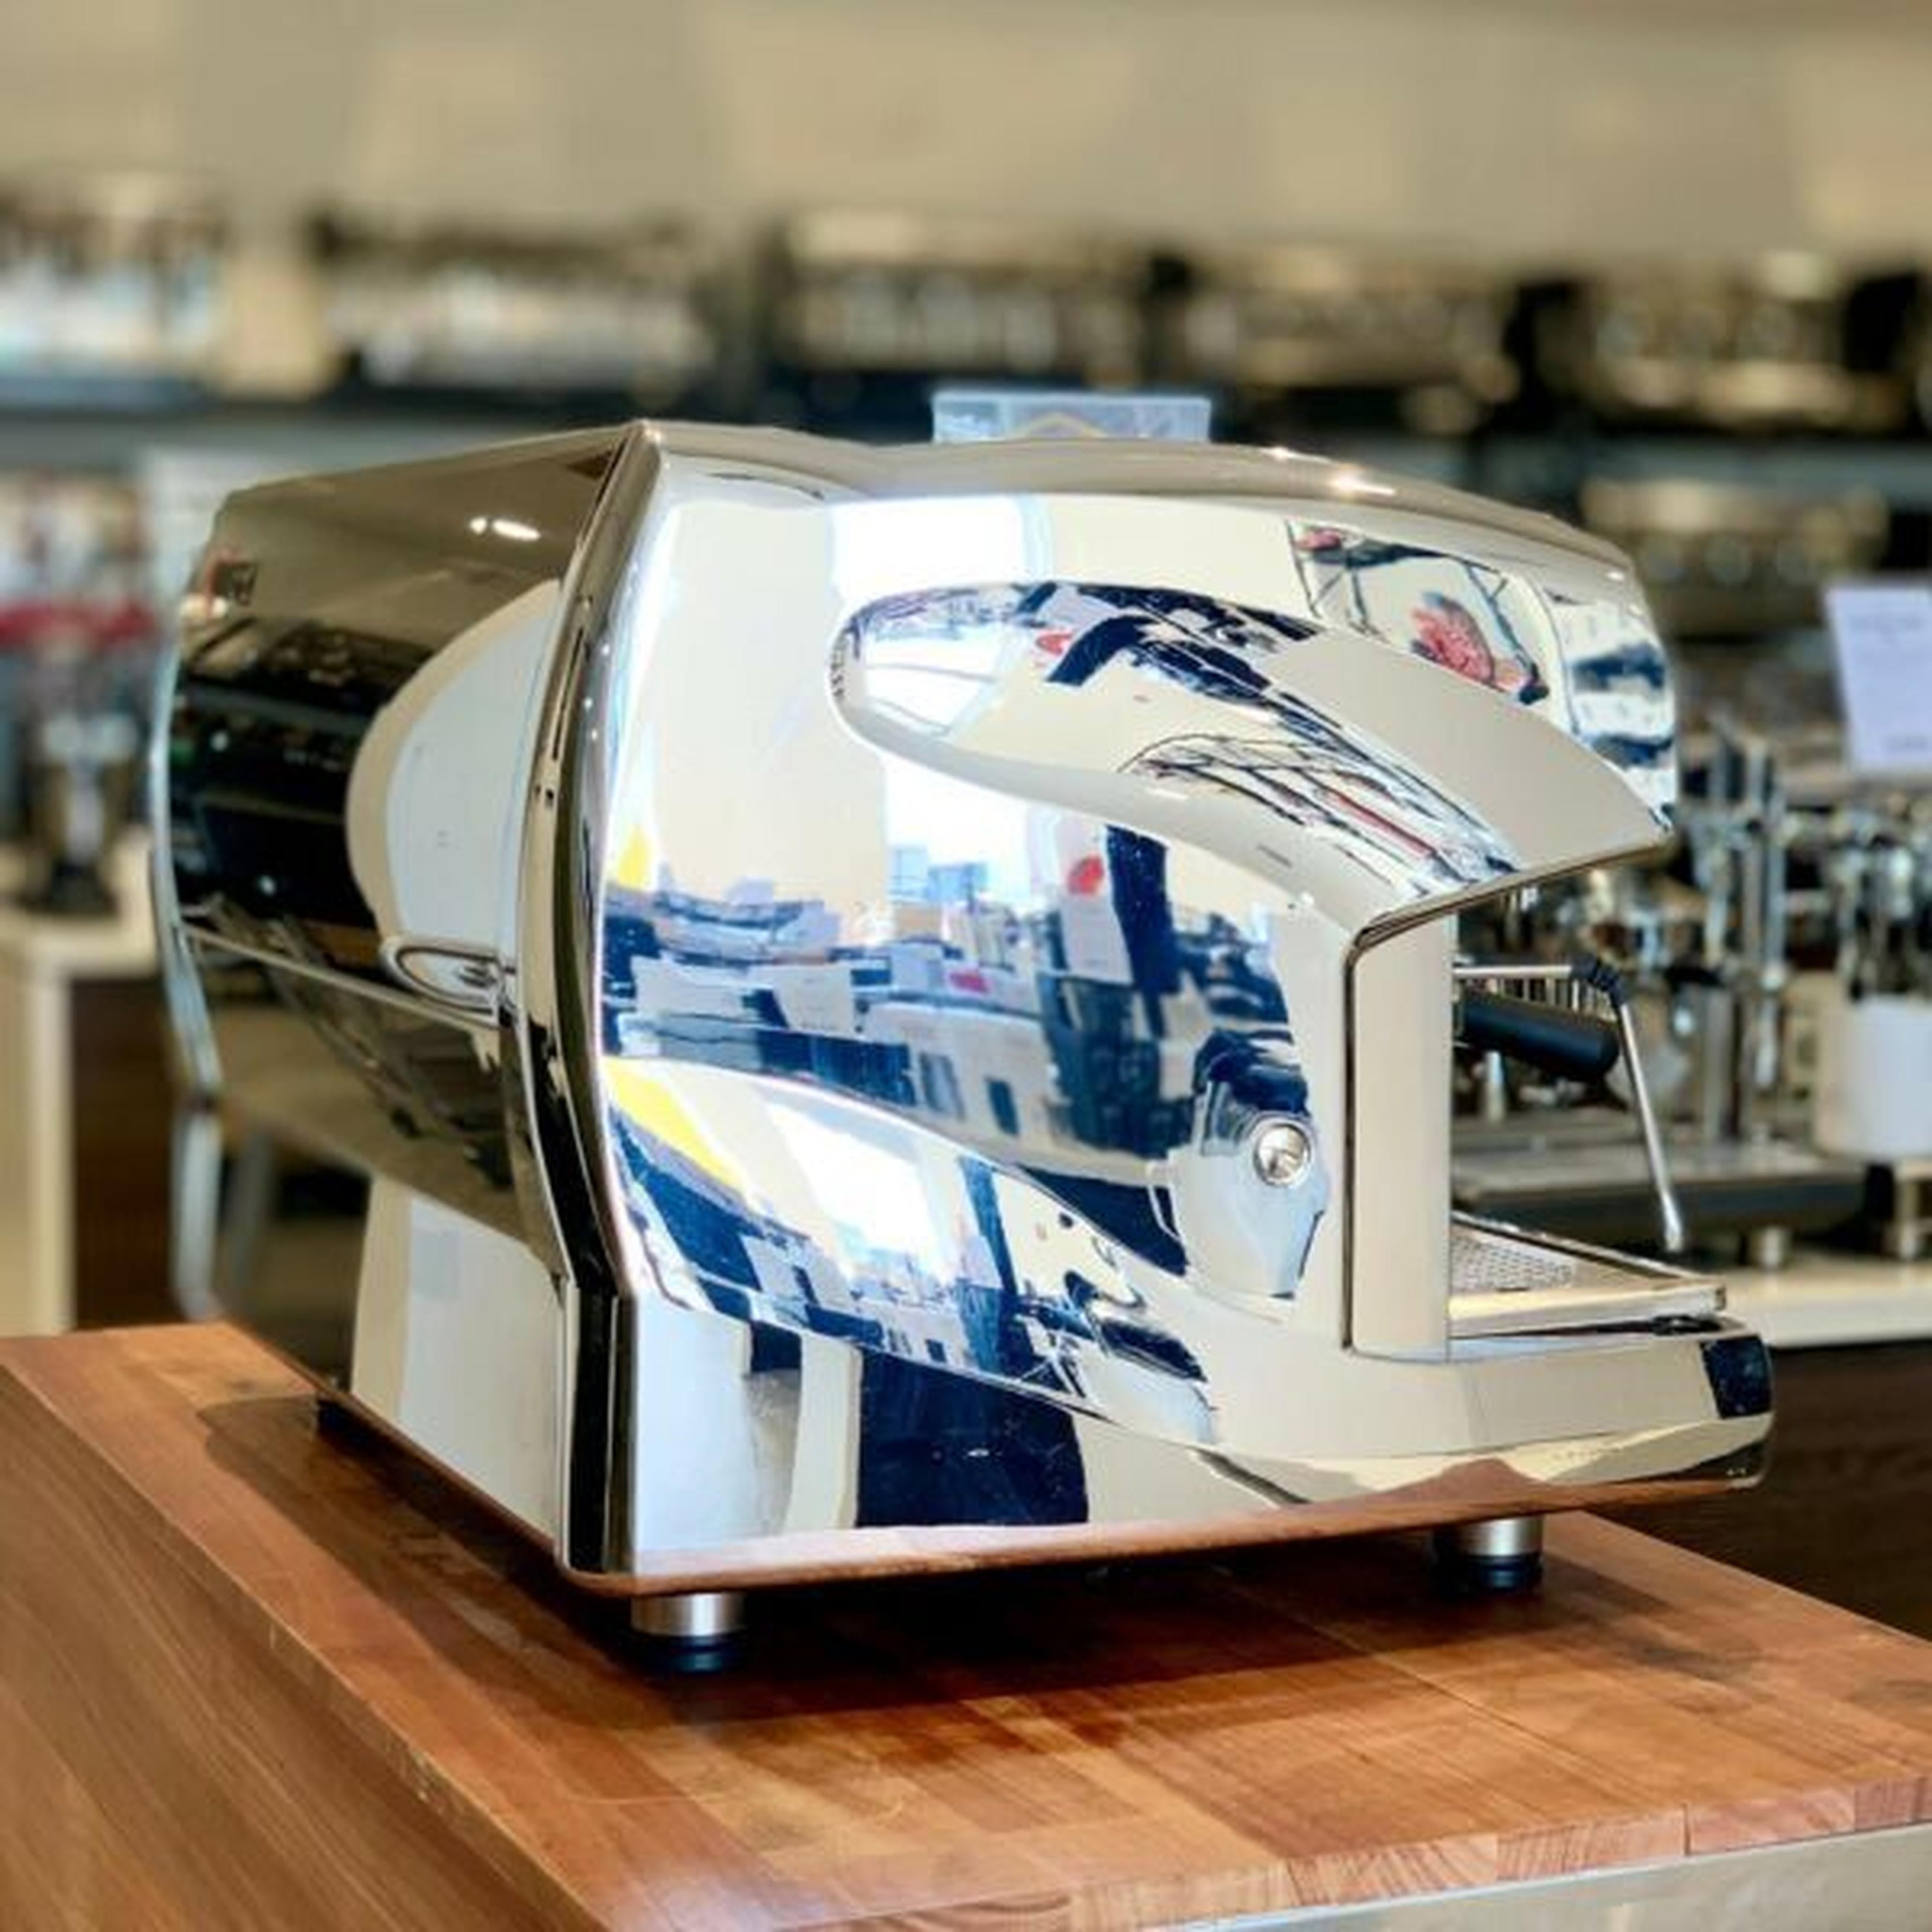 Immaculate Used 2 Group Wega Polaris Commercial Coffee Machine